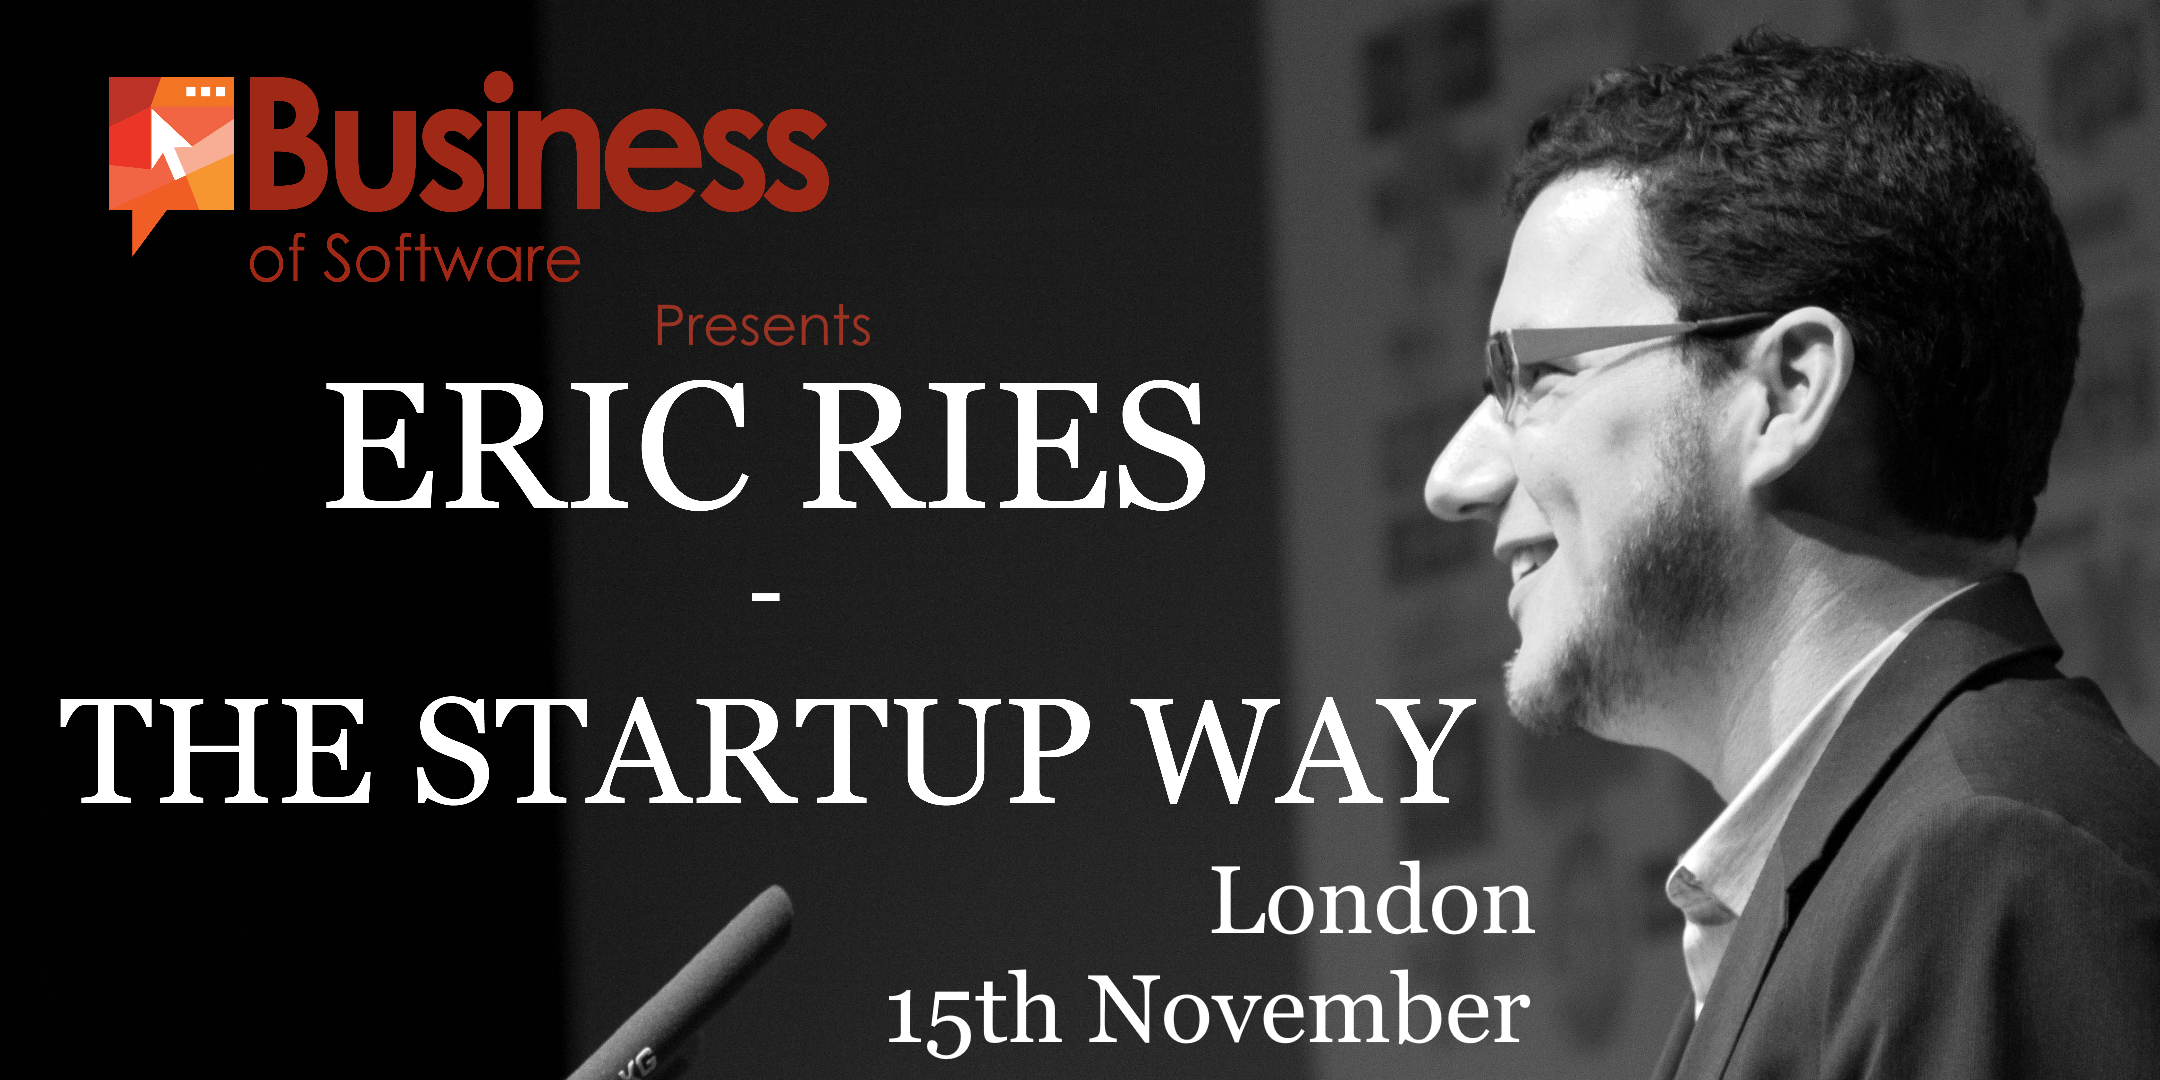 Eric Ries - The Startup Way